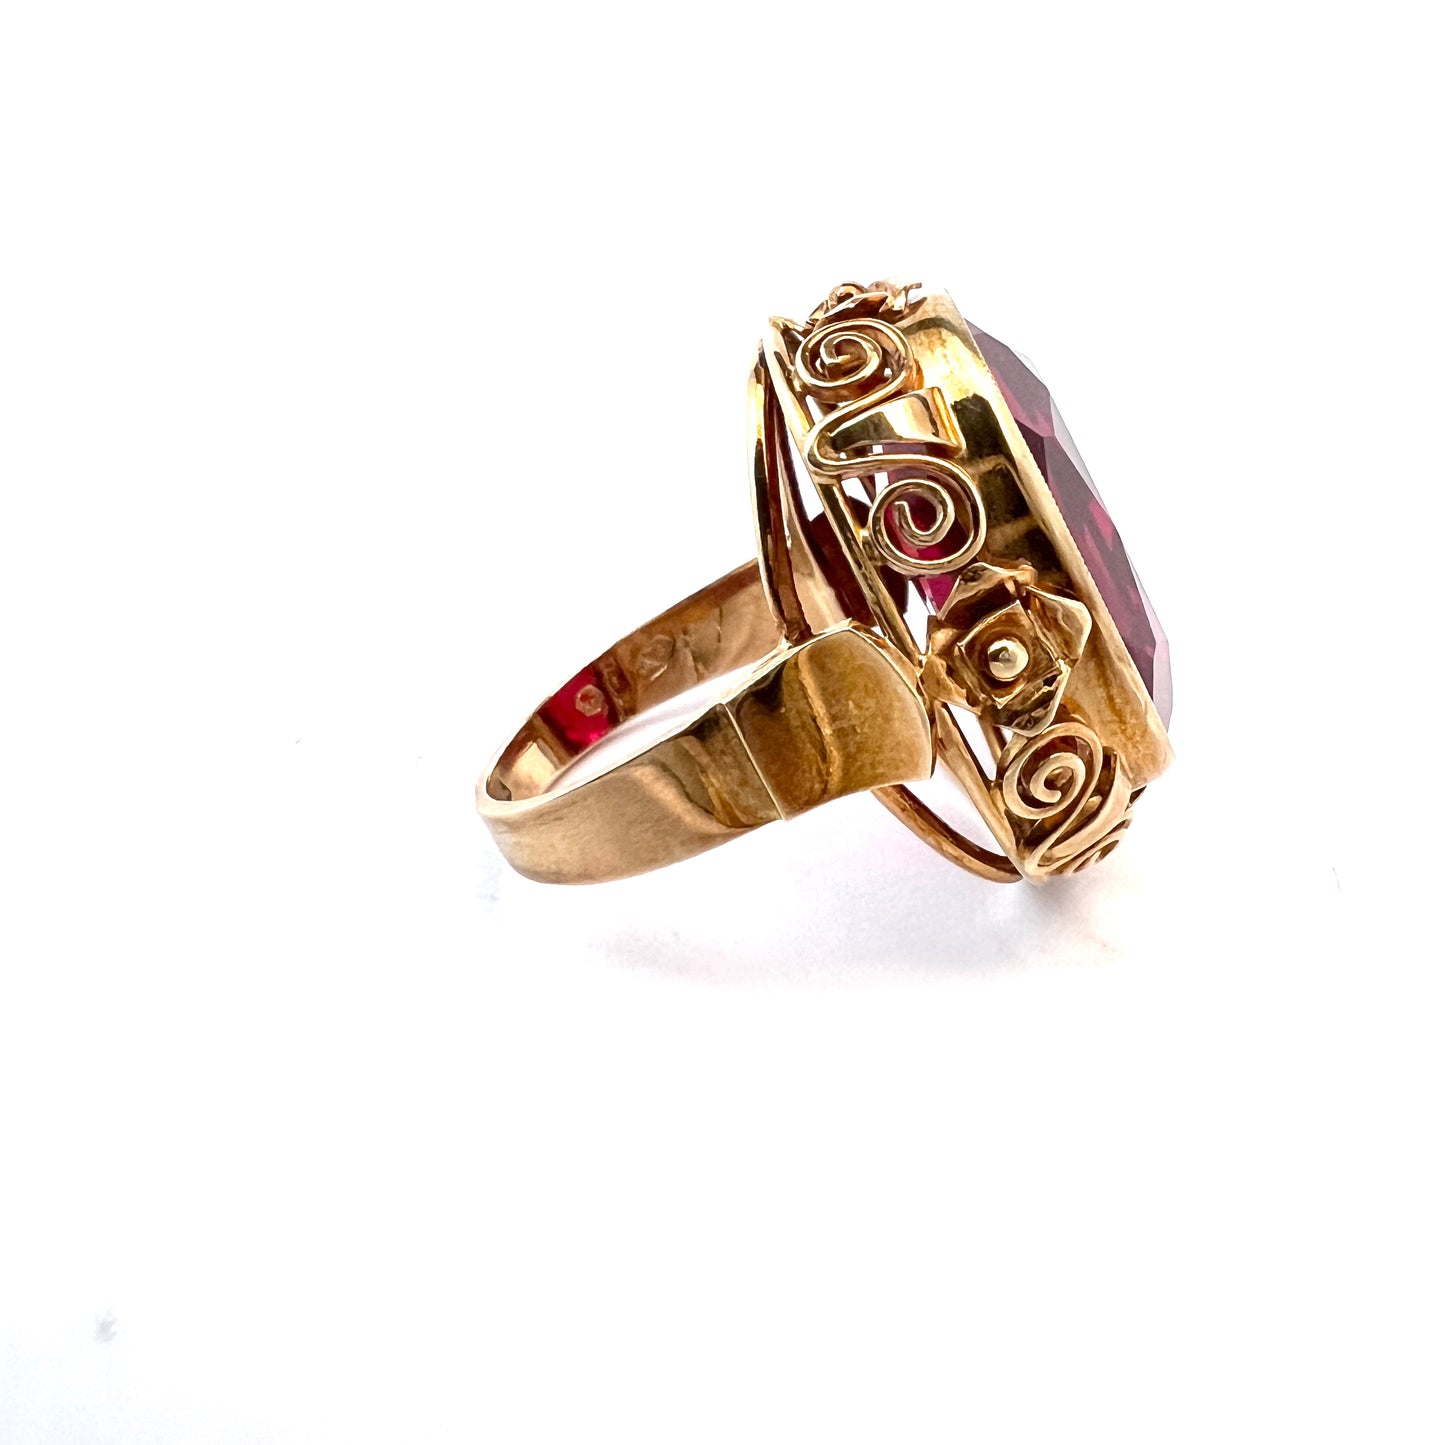 Poland. Vintage c 1960s. Bold 14k Gold Synthetic Ruby Ring. 11.2gram